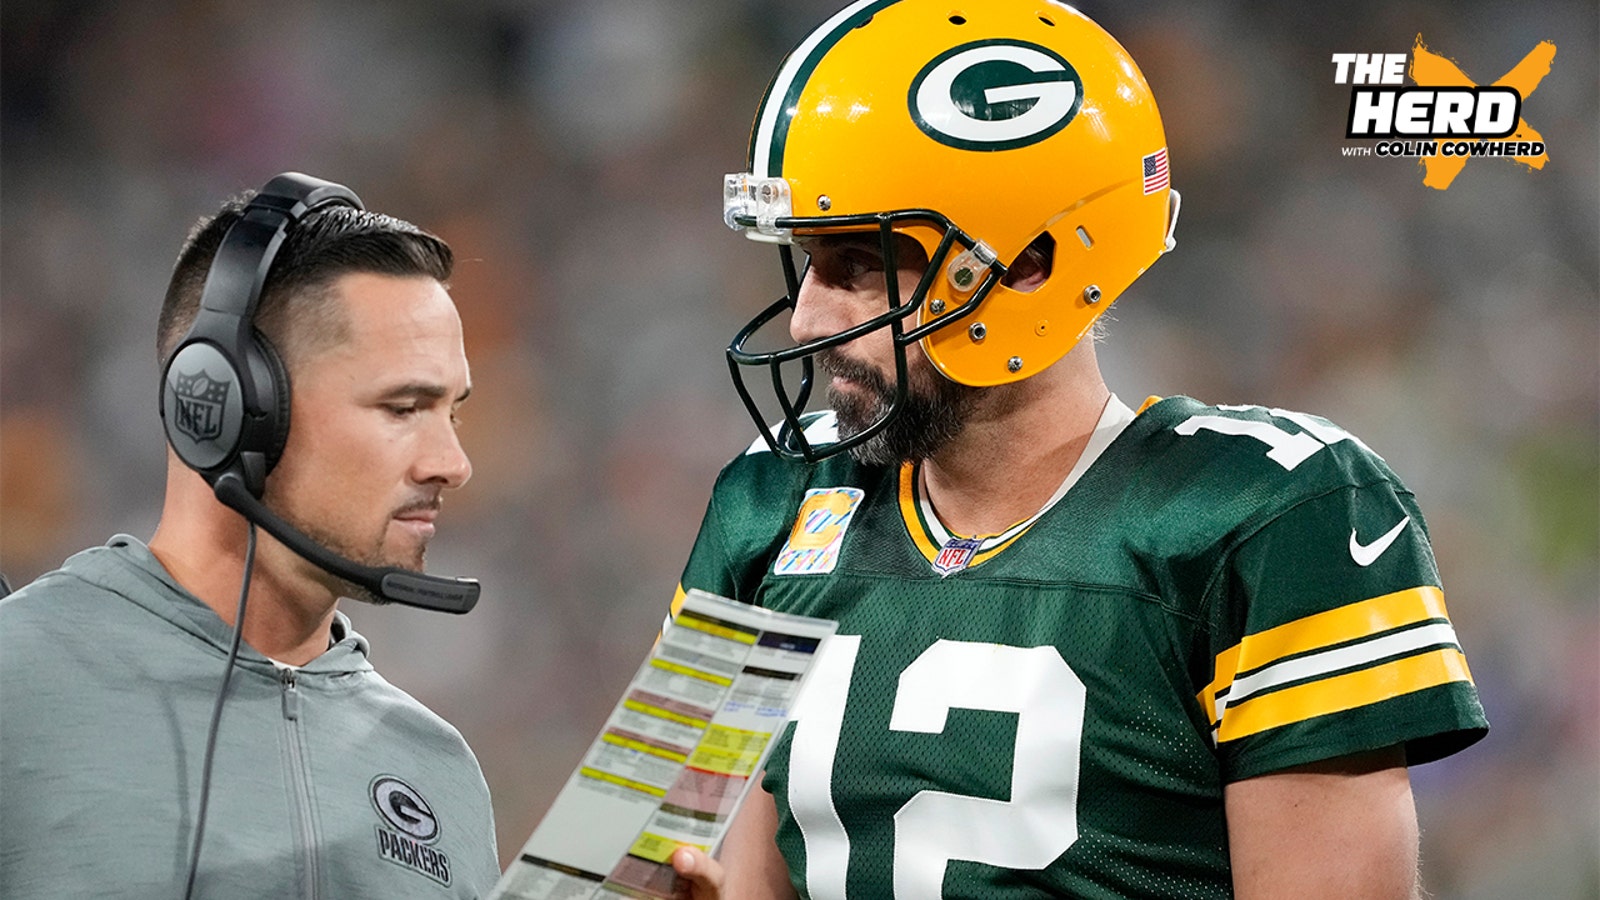 Are Packers still Super Bowl contenders despite early struggles? | THE HERD